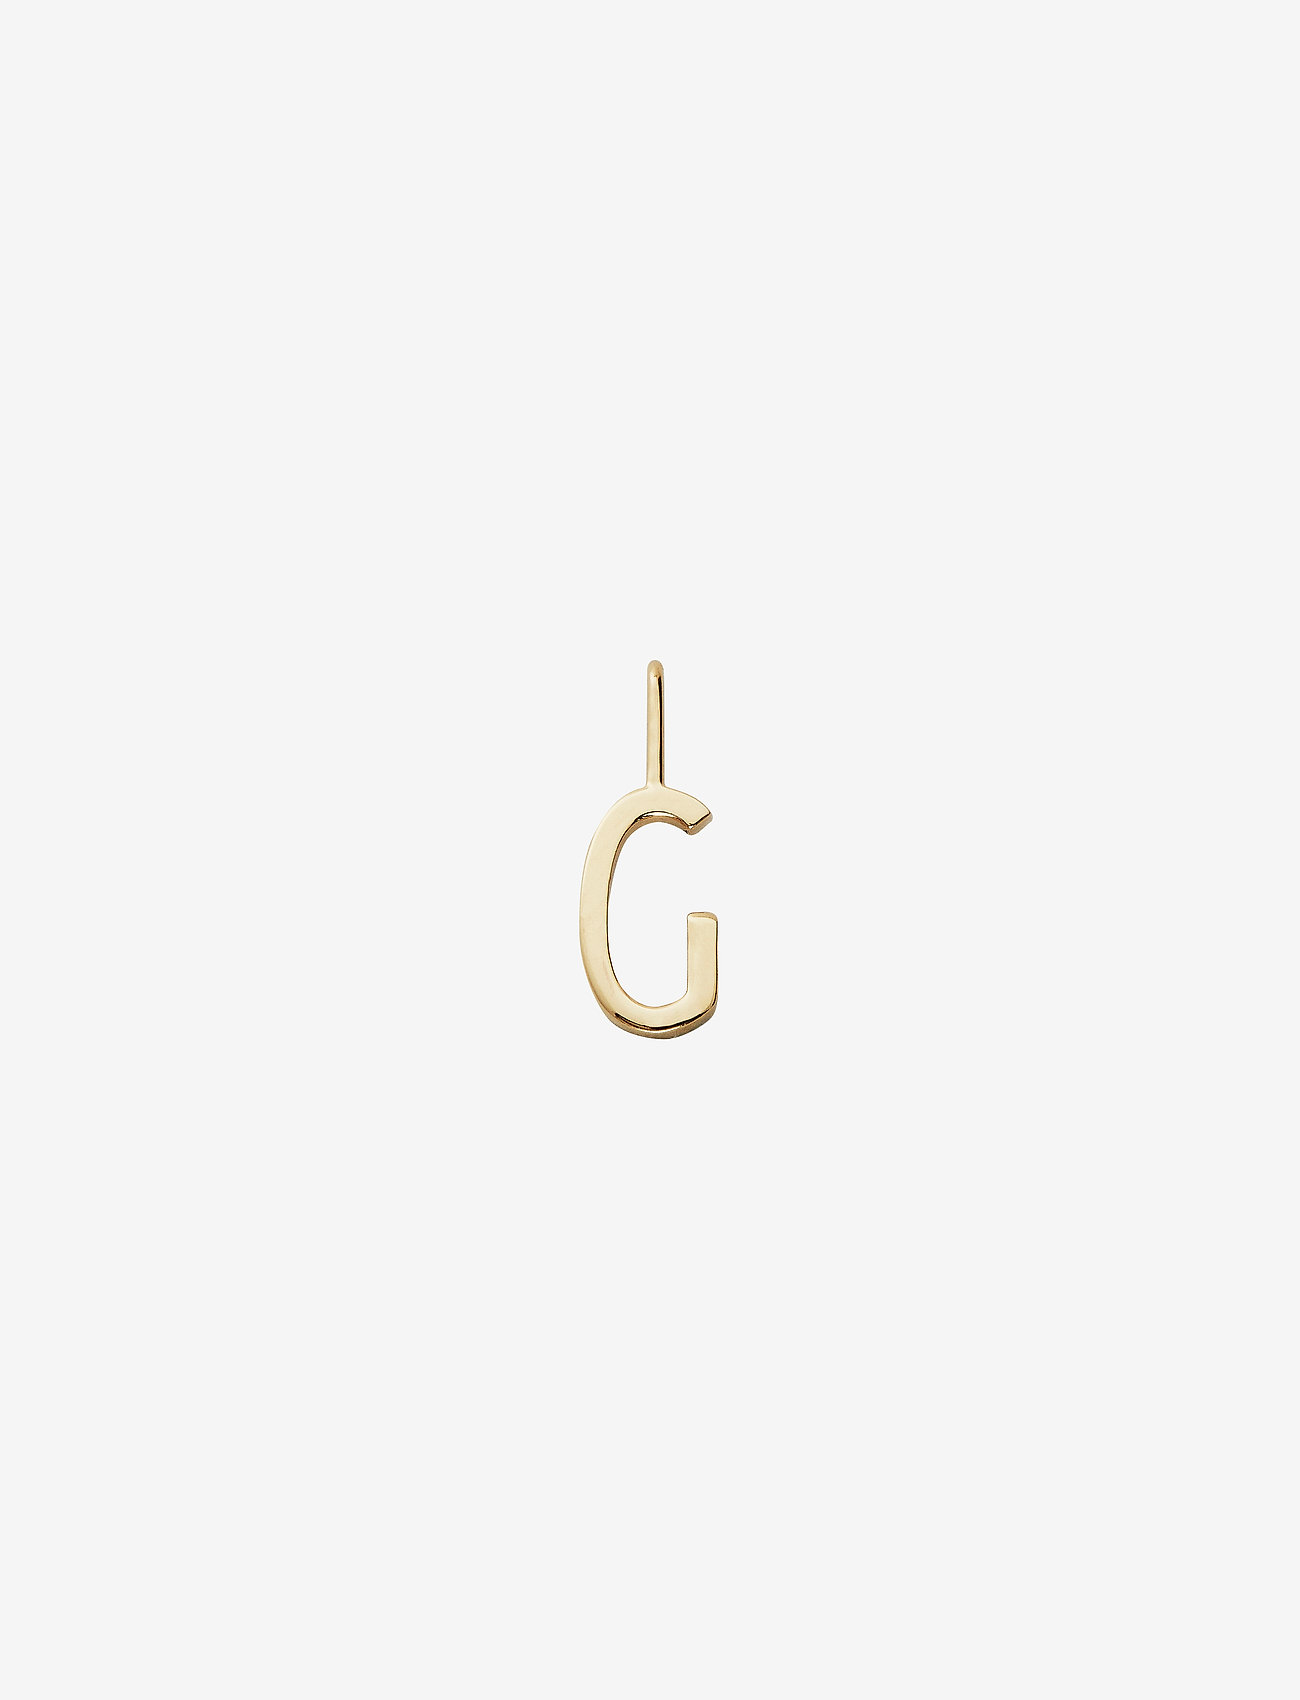 Design Letters - 10mm 18k gold plated silver a-z - juhlamuotia outlet-hintaan - gold - 0